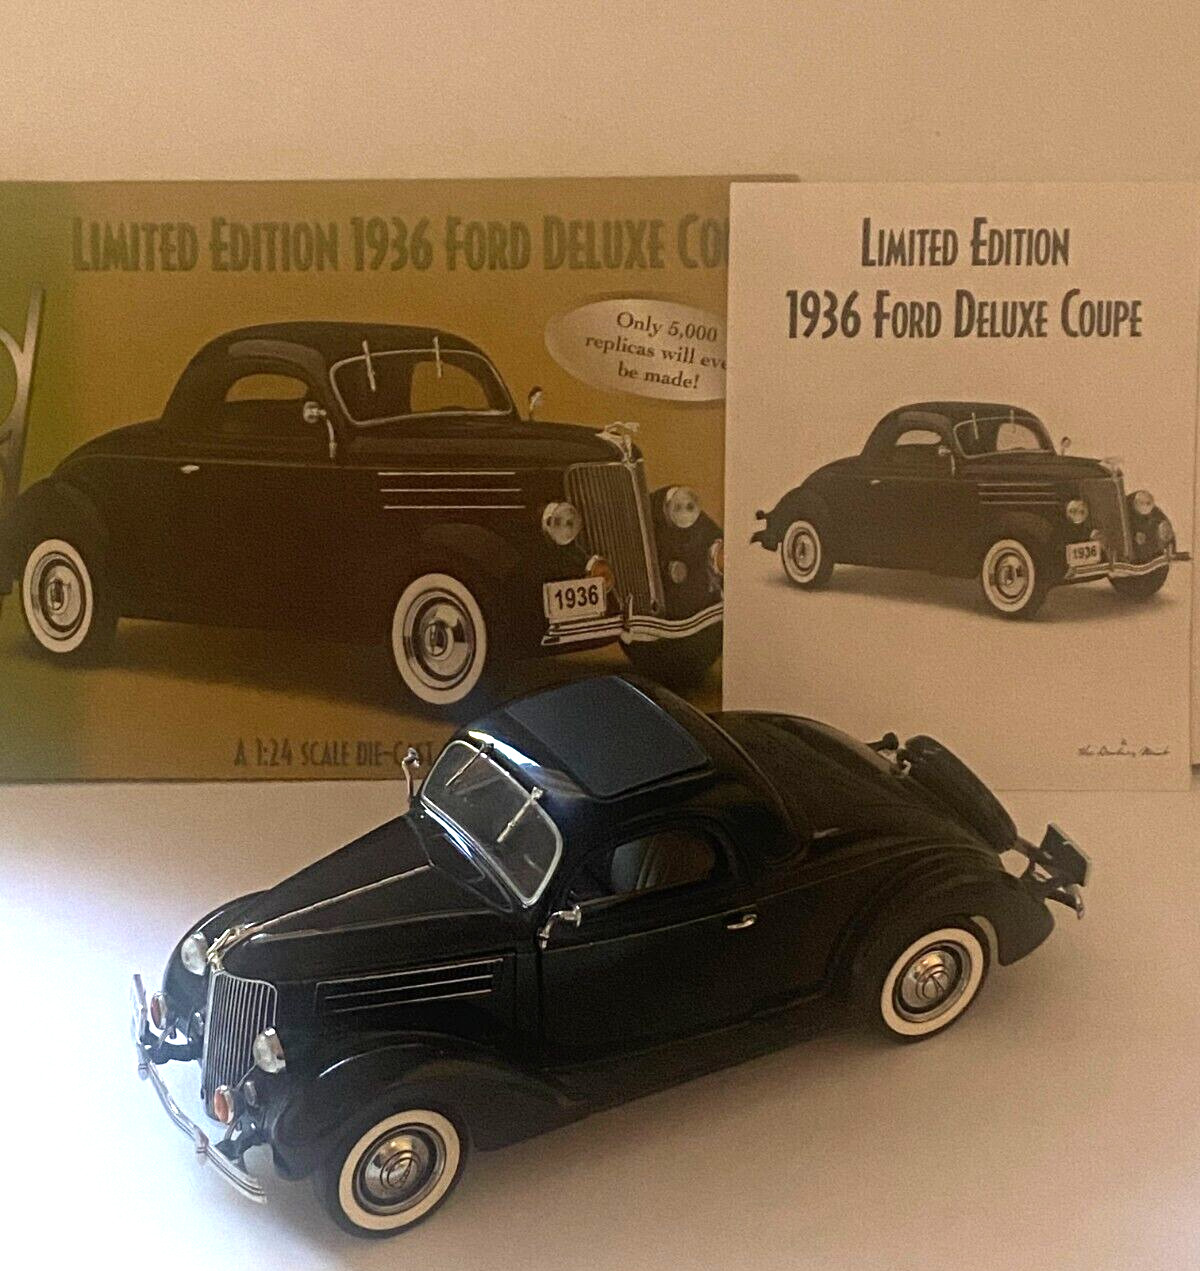 Danbury Mint 1936 Ford Deluxe Coupe Limited Edition Ltd 1/24 Diecast Car